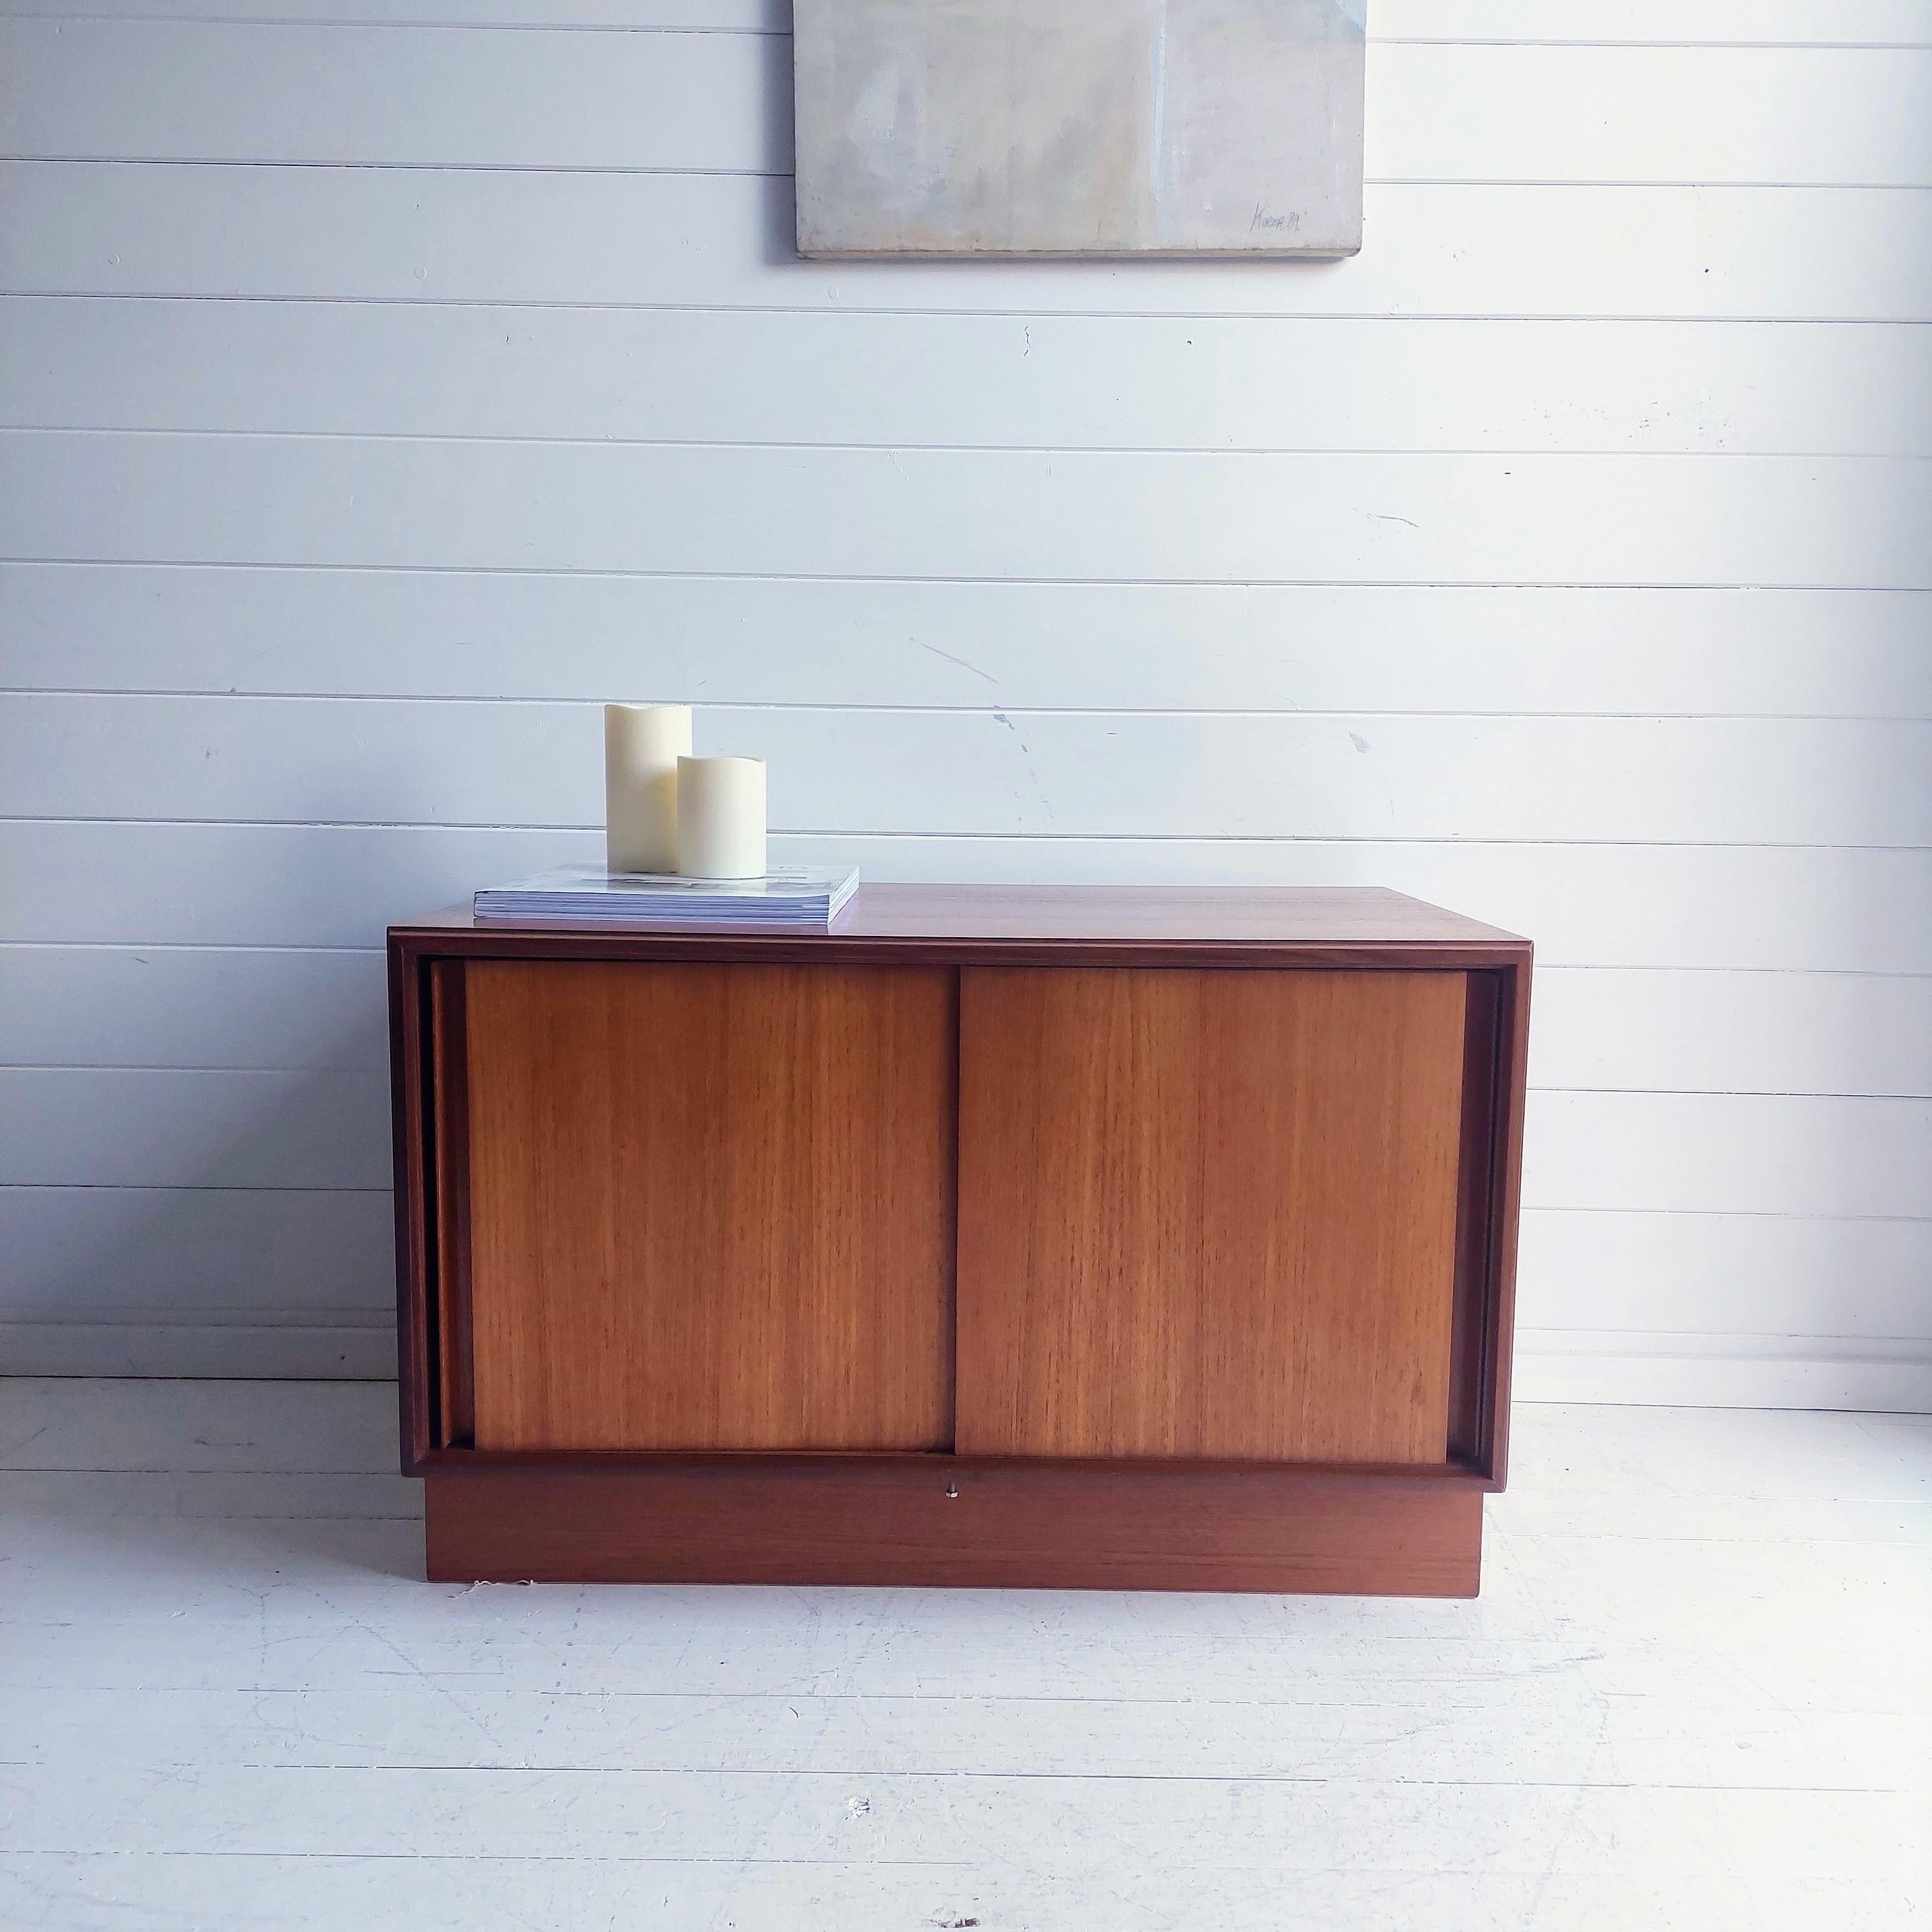 A floor teak sideboard by G-Plan. 
Originally part of a Gplan wall unit from the form Five Range designed by  R Bennet in 1967 and produced until 1970s.

It features 
Sleek and stylish teak piece with two sliding doors
It uses a very clever groove